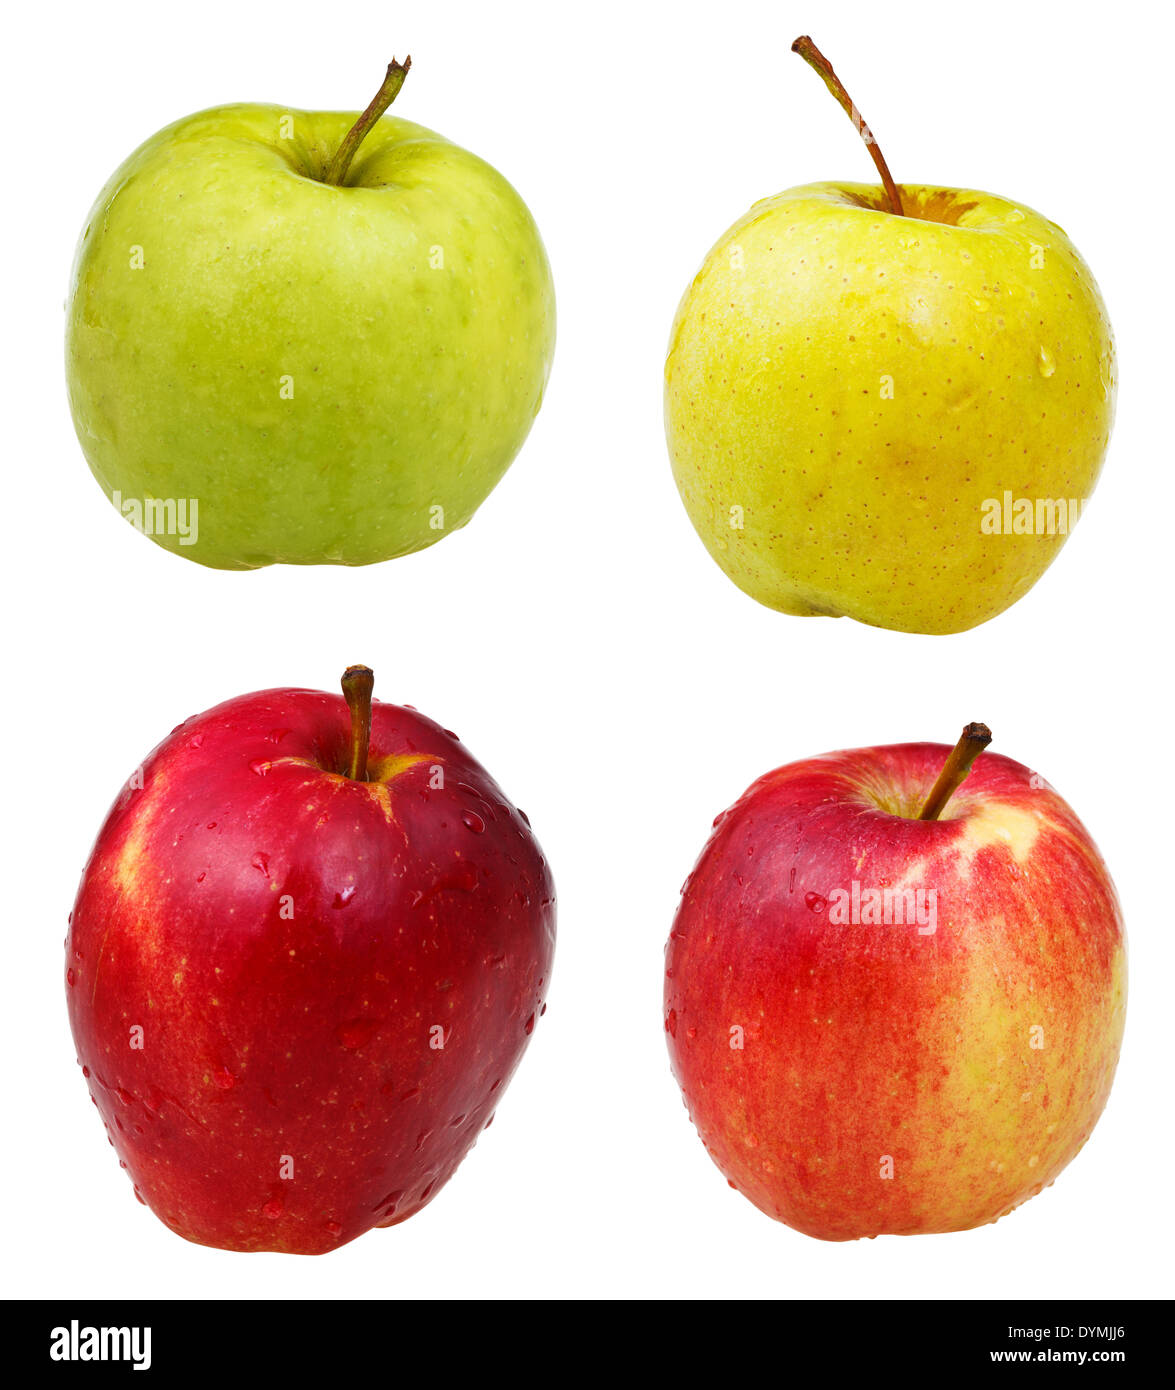 golden delicious, granny smith, golden delicious, red wealthy apples isolated on white background Stock Photo